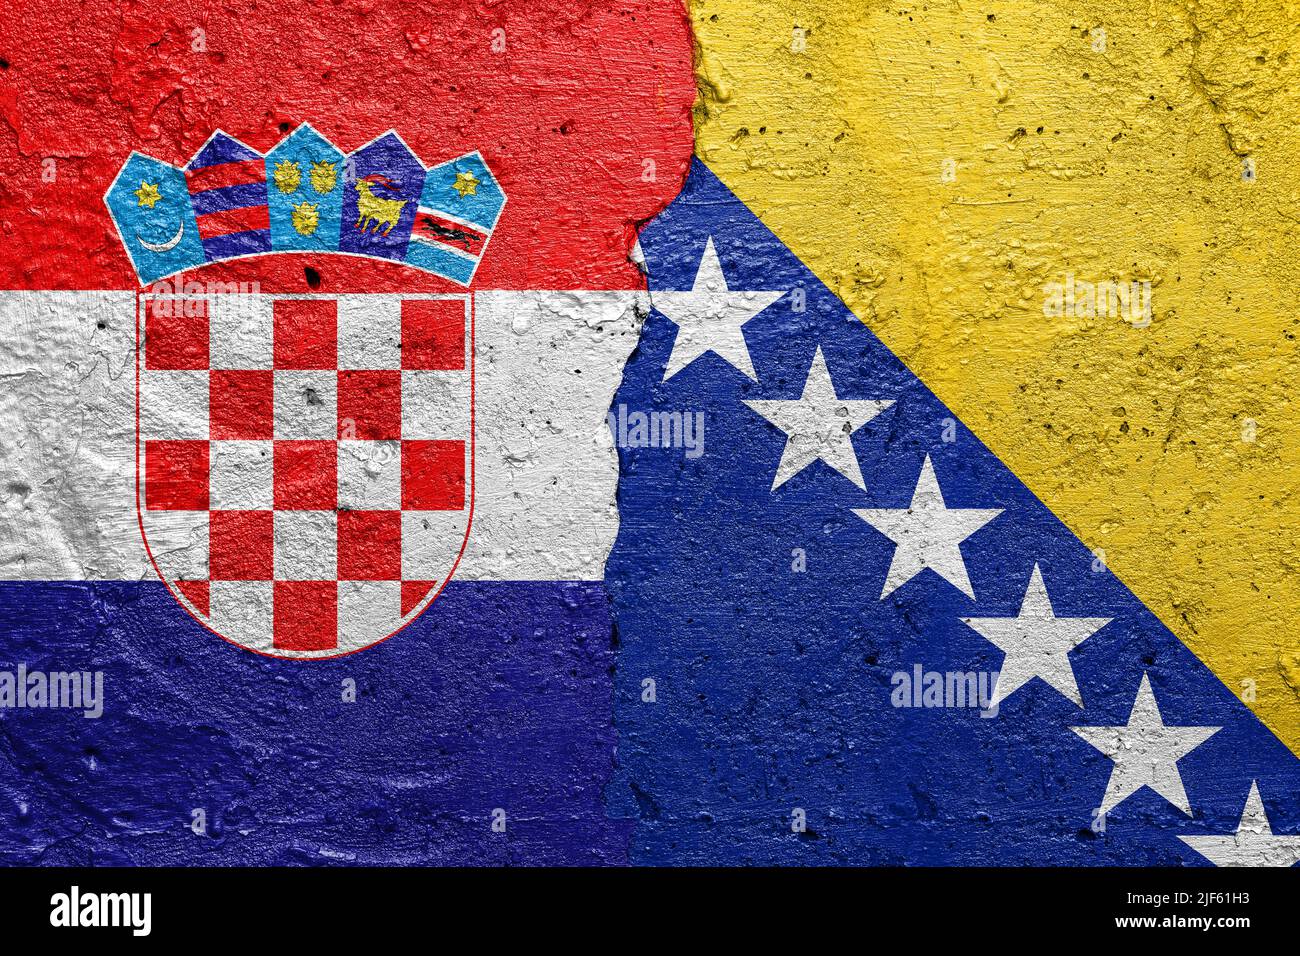 Croatia and Bosnia and Herzegovina - Cracked concrete wall painted with a Croatian flag on the left and a Bosnian flag on the right Stock Photo